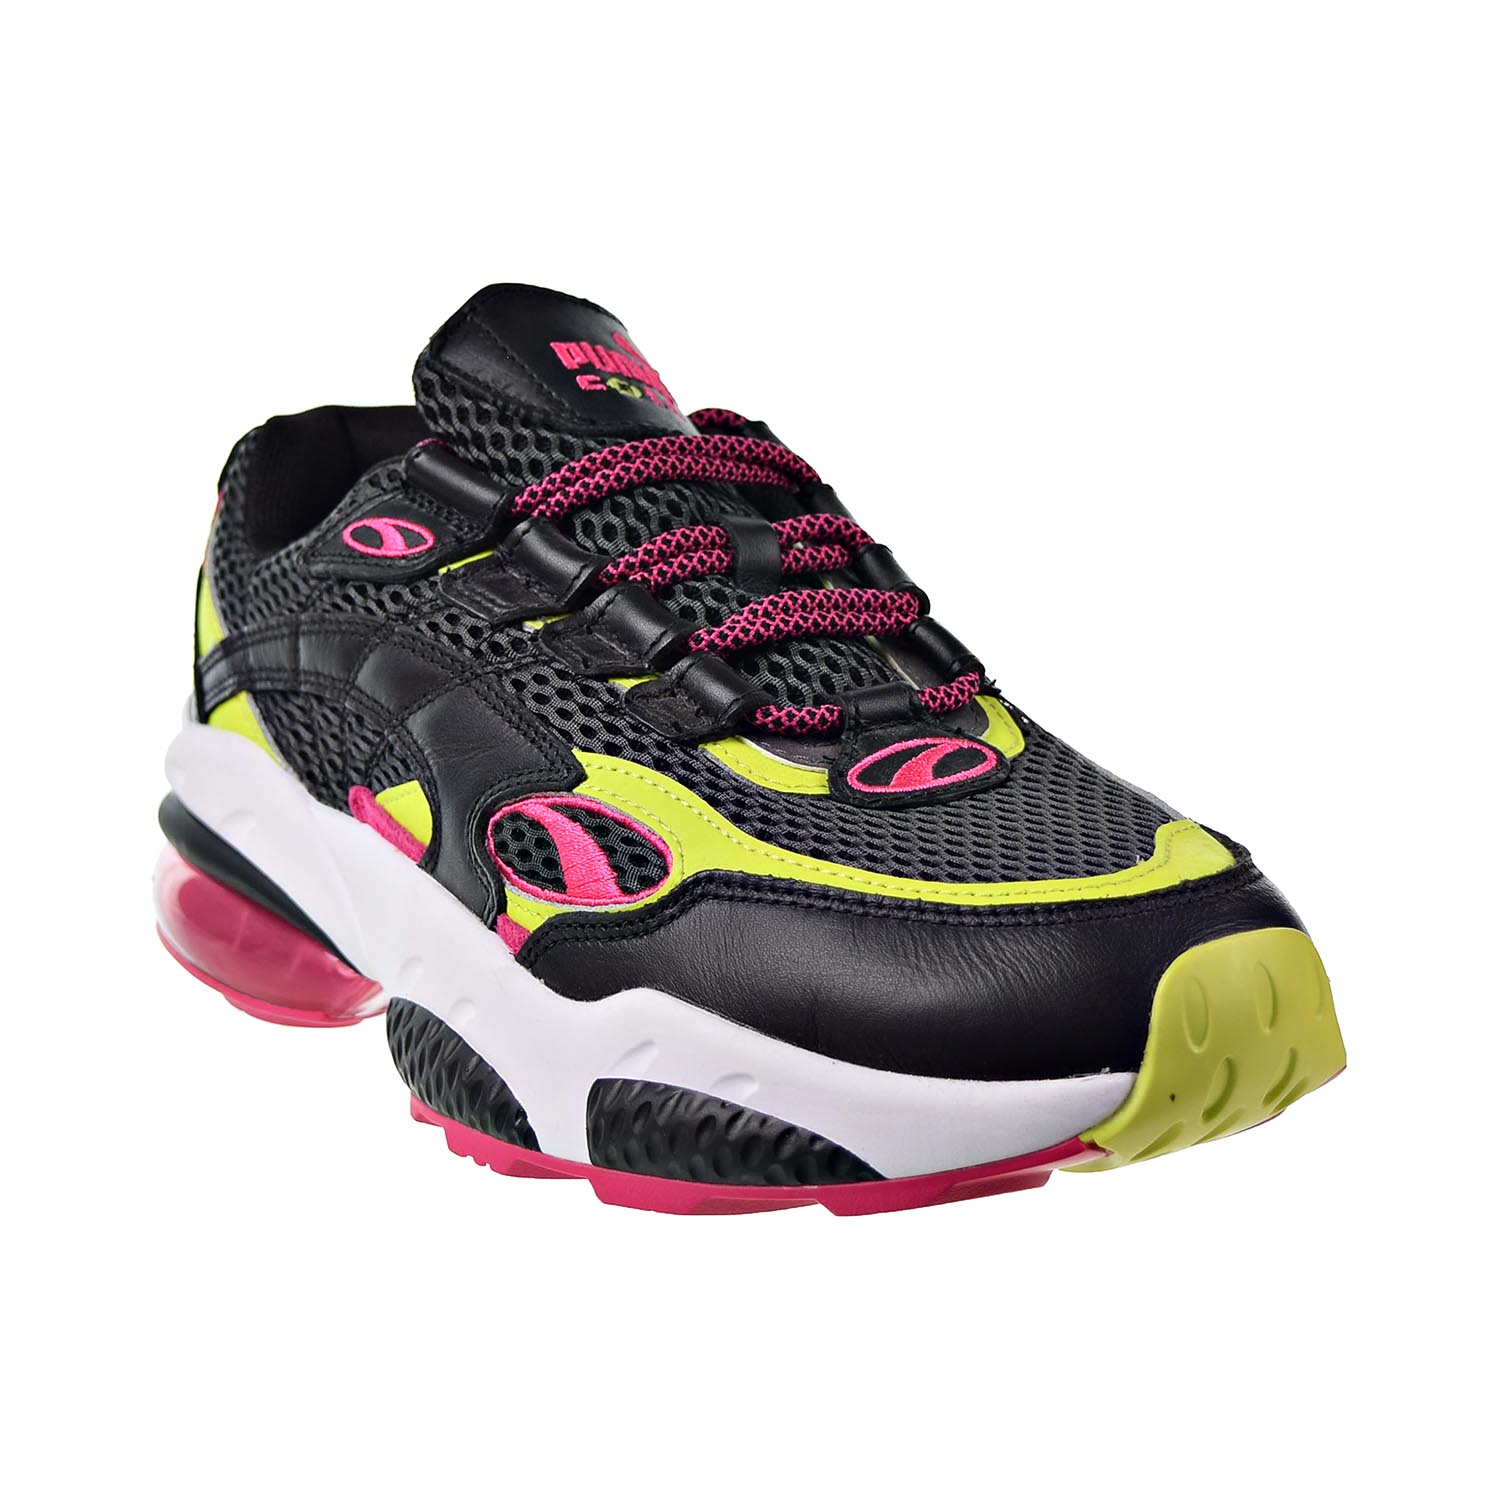 Puma Cell Venom 370417-01 Men Black/Pink/Lime Punch Athletic Running Shoes C1385 (10) - image 2 of 6